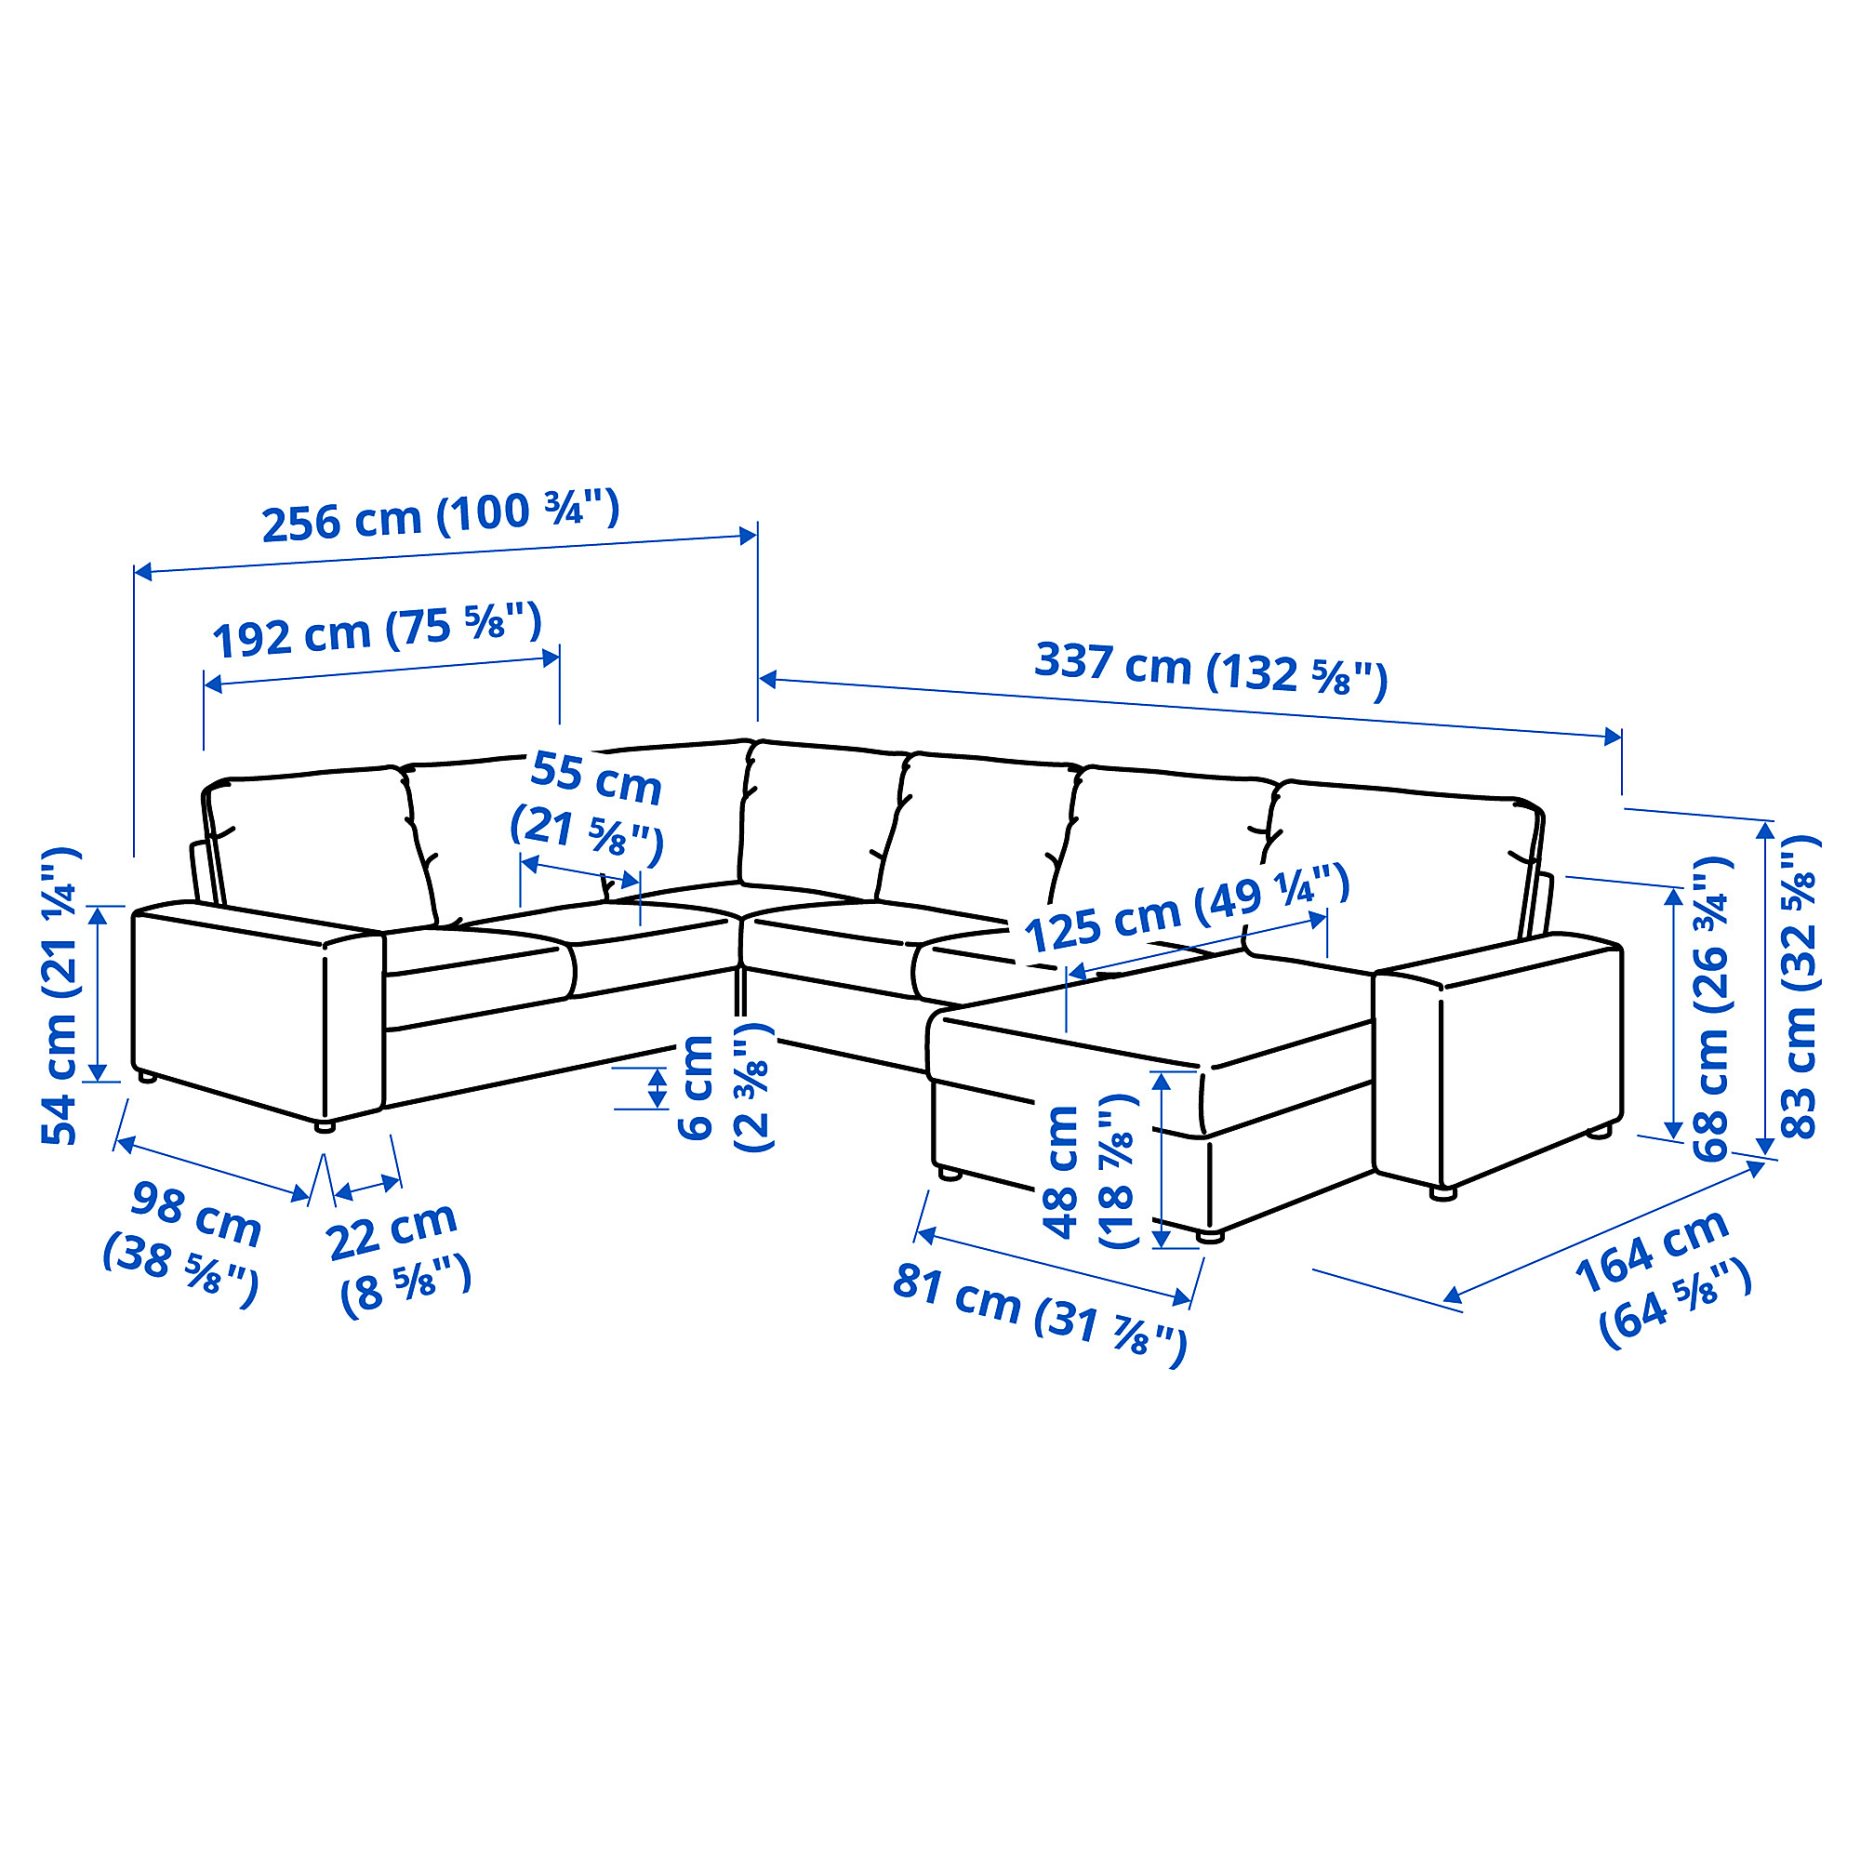 VIMLE, corner sofa, 5-seat with chaise longue with wide armrests, 294.018.27